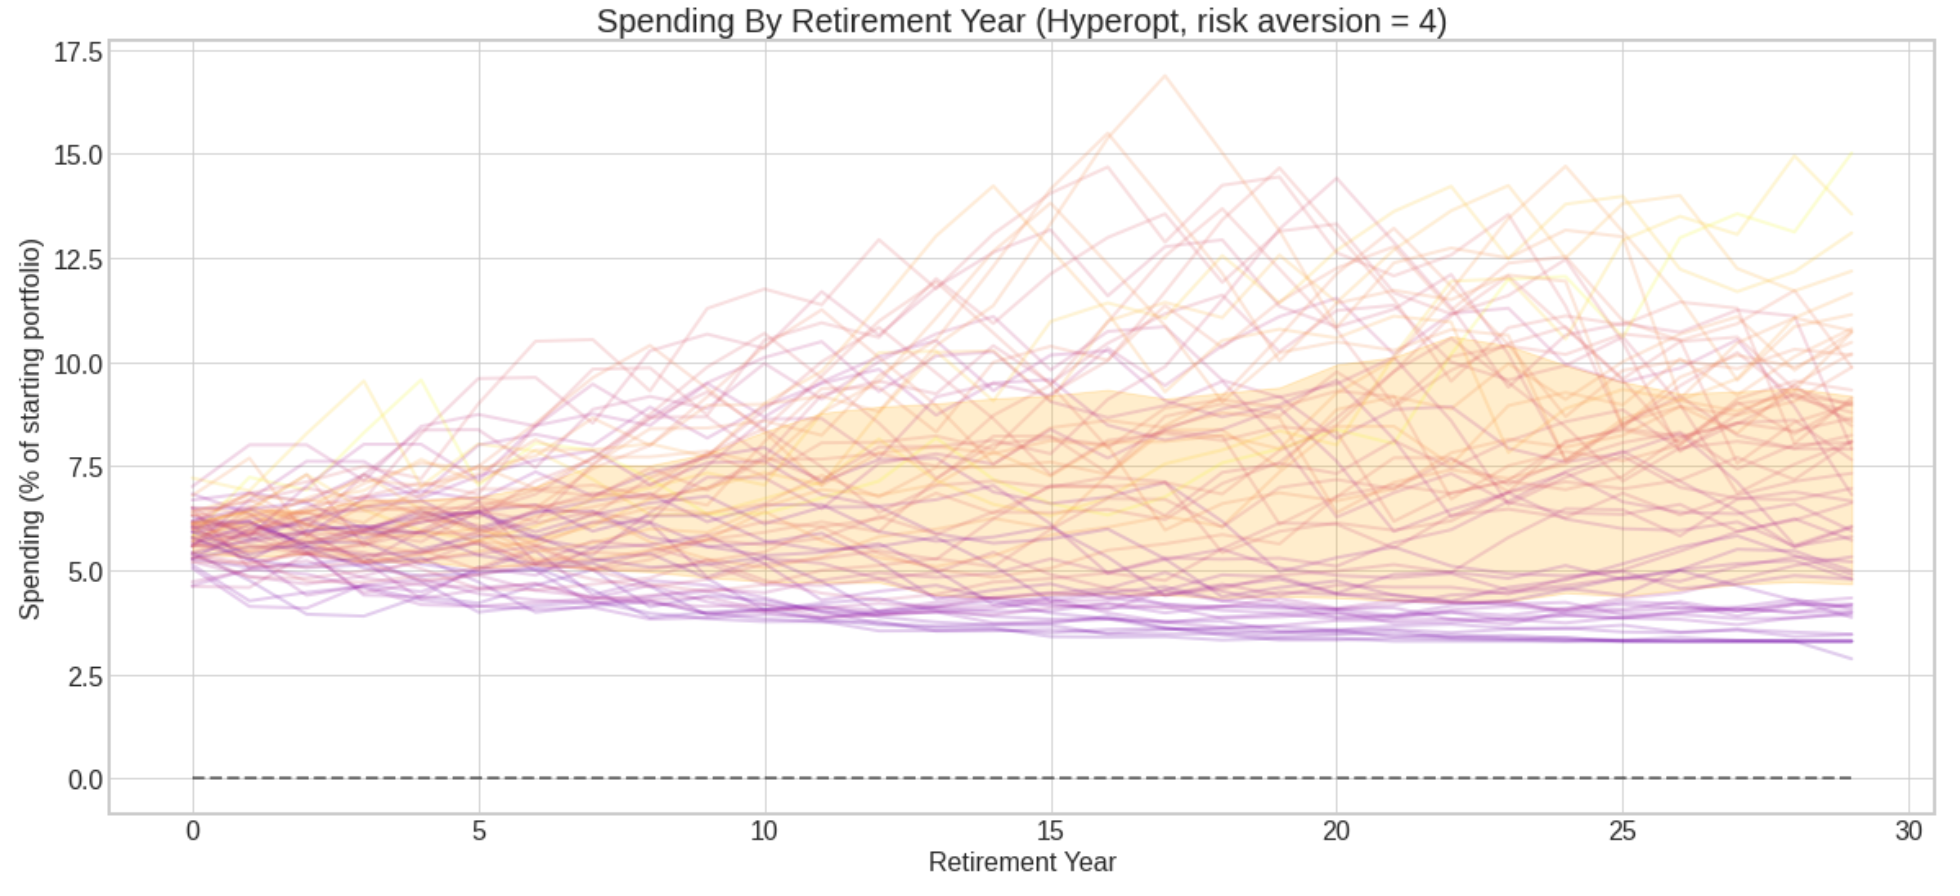 Chart of 30-year spending outcomes of 64 retirement cohorts 1928-1991